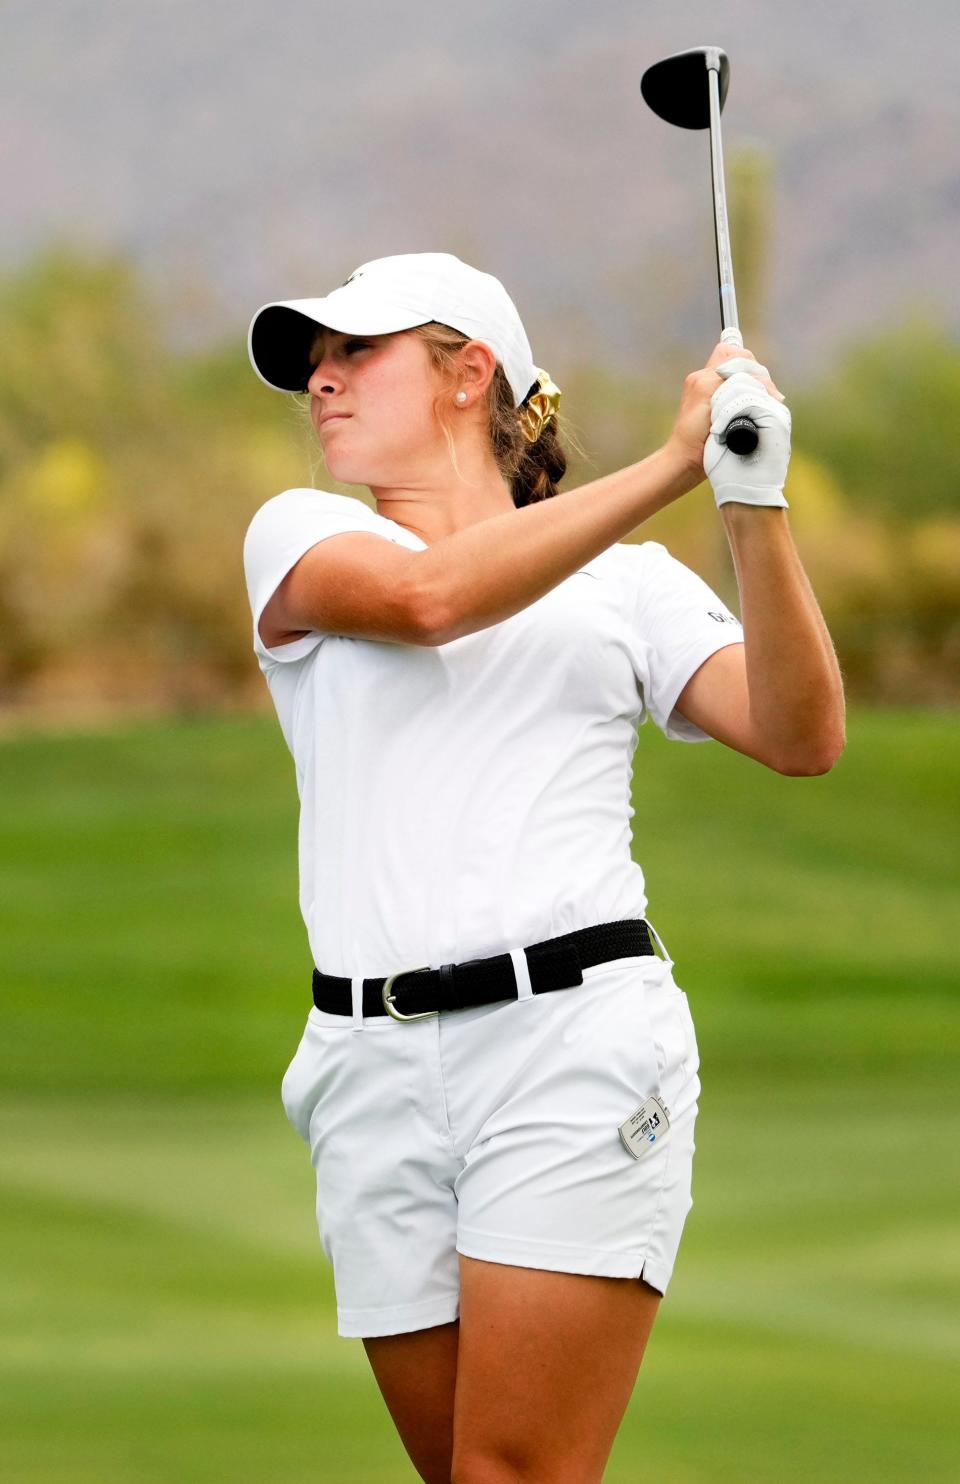 Rachel Kuehn from Wake Forest plays her tee shot on the 10th hole during the first day of stroke play competition at the NCAA Division I Women's Golf Championships at Grayhawk Golf Club in Scottsdale on May 19, 2023.